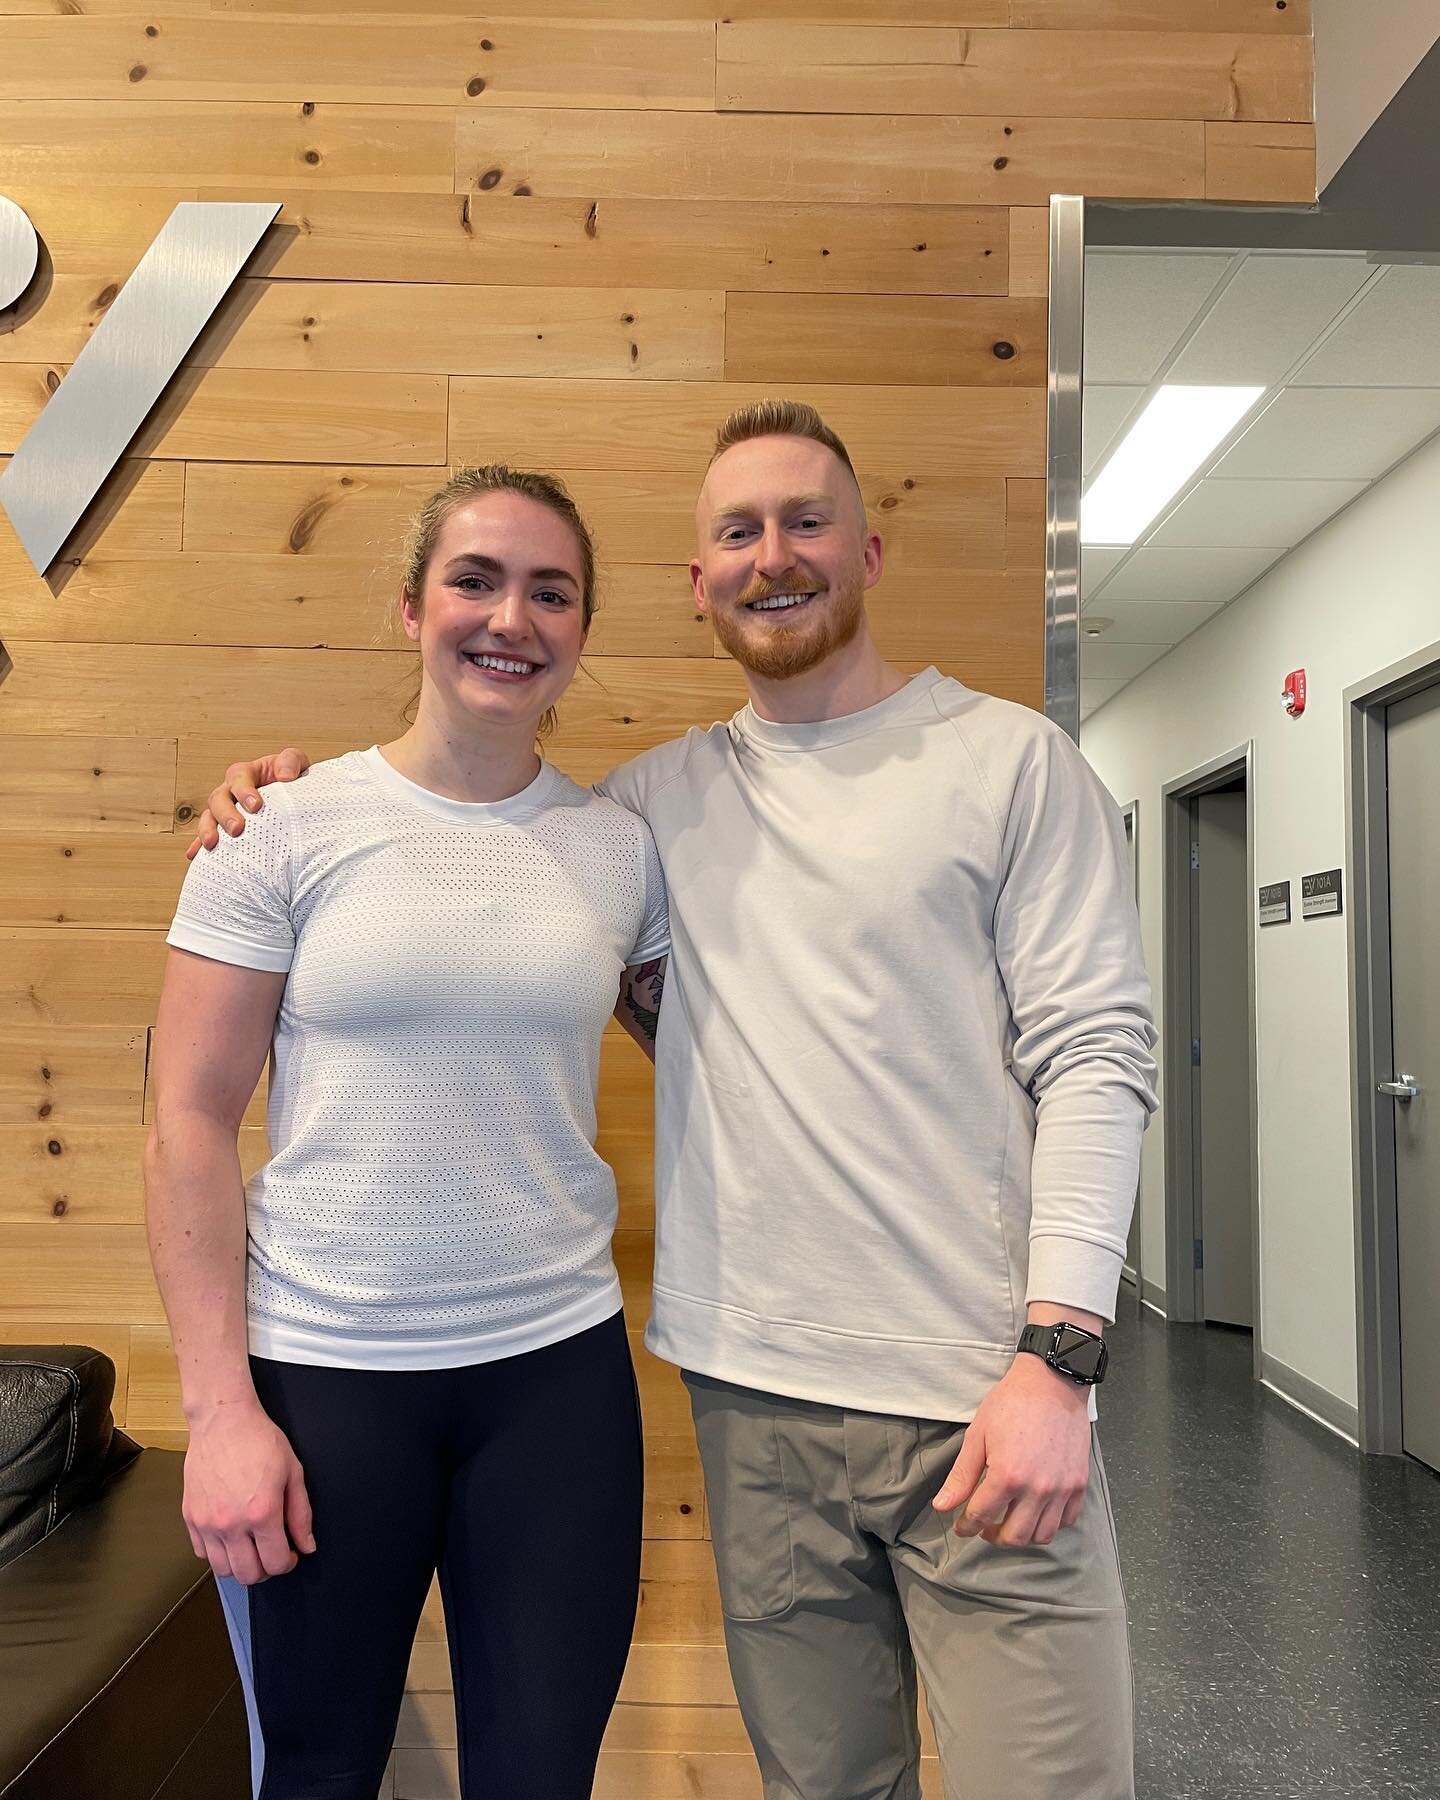 Client Wins

Danielle and I have been working together for over 2 years now. We used to train together in person

She is the type of person who shows up day after day just for the sake of being better.

She competed in a novice powerlifting competiti